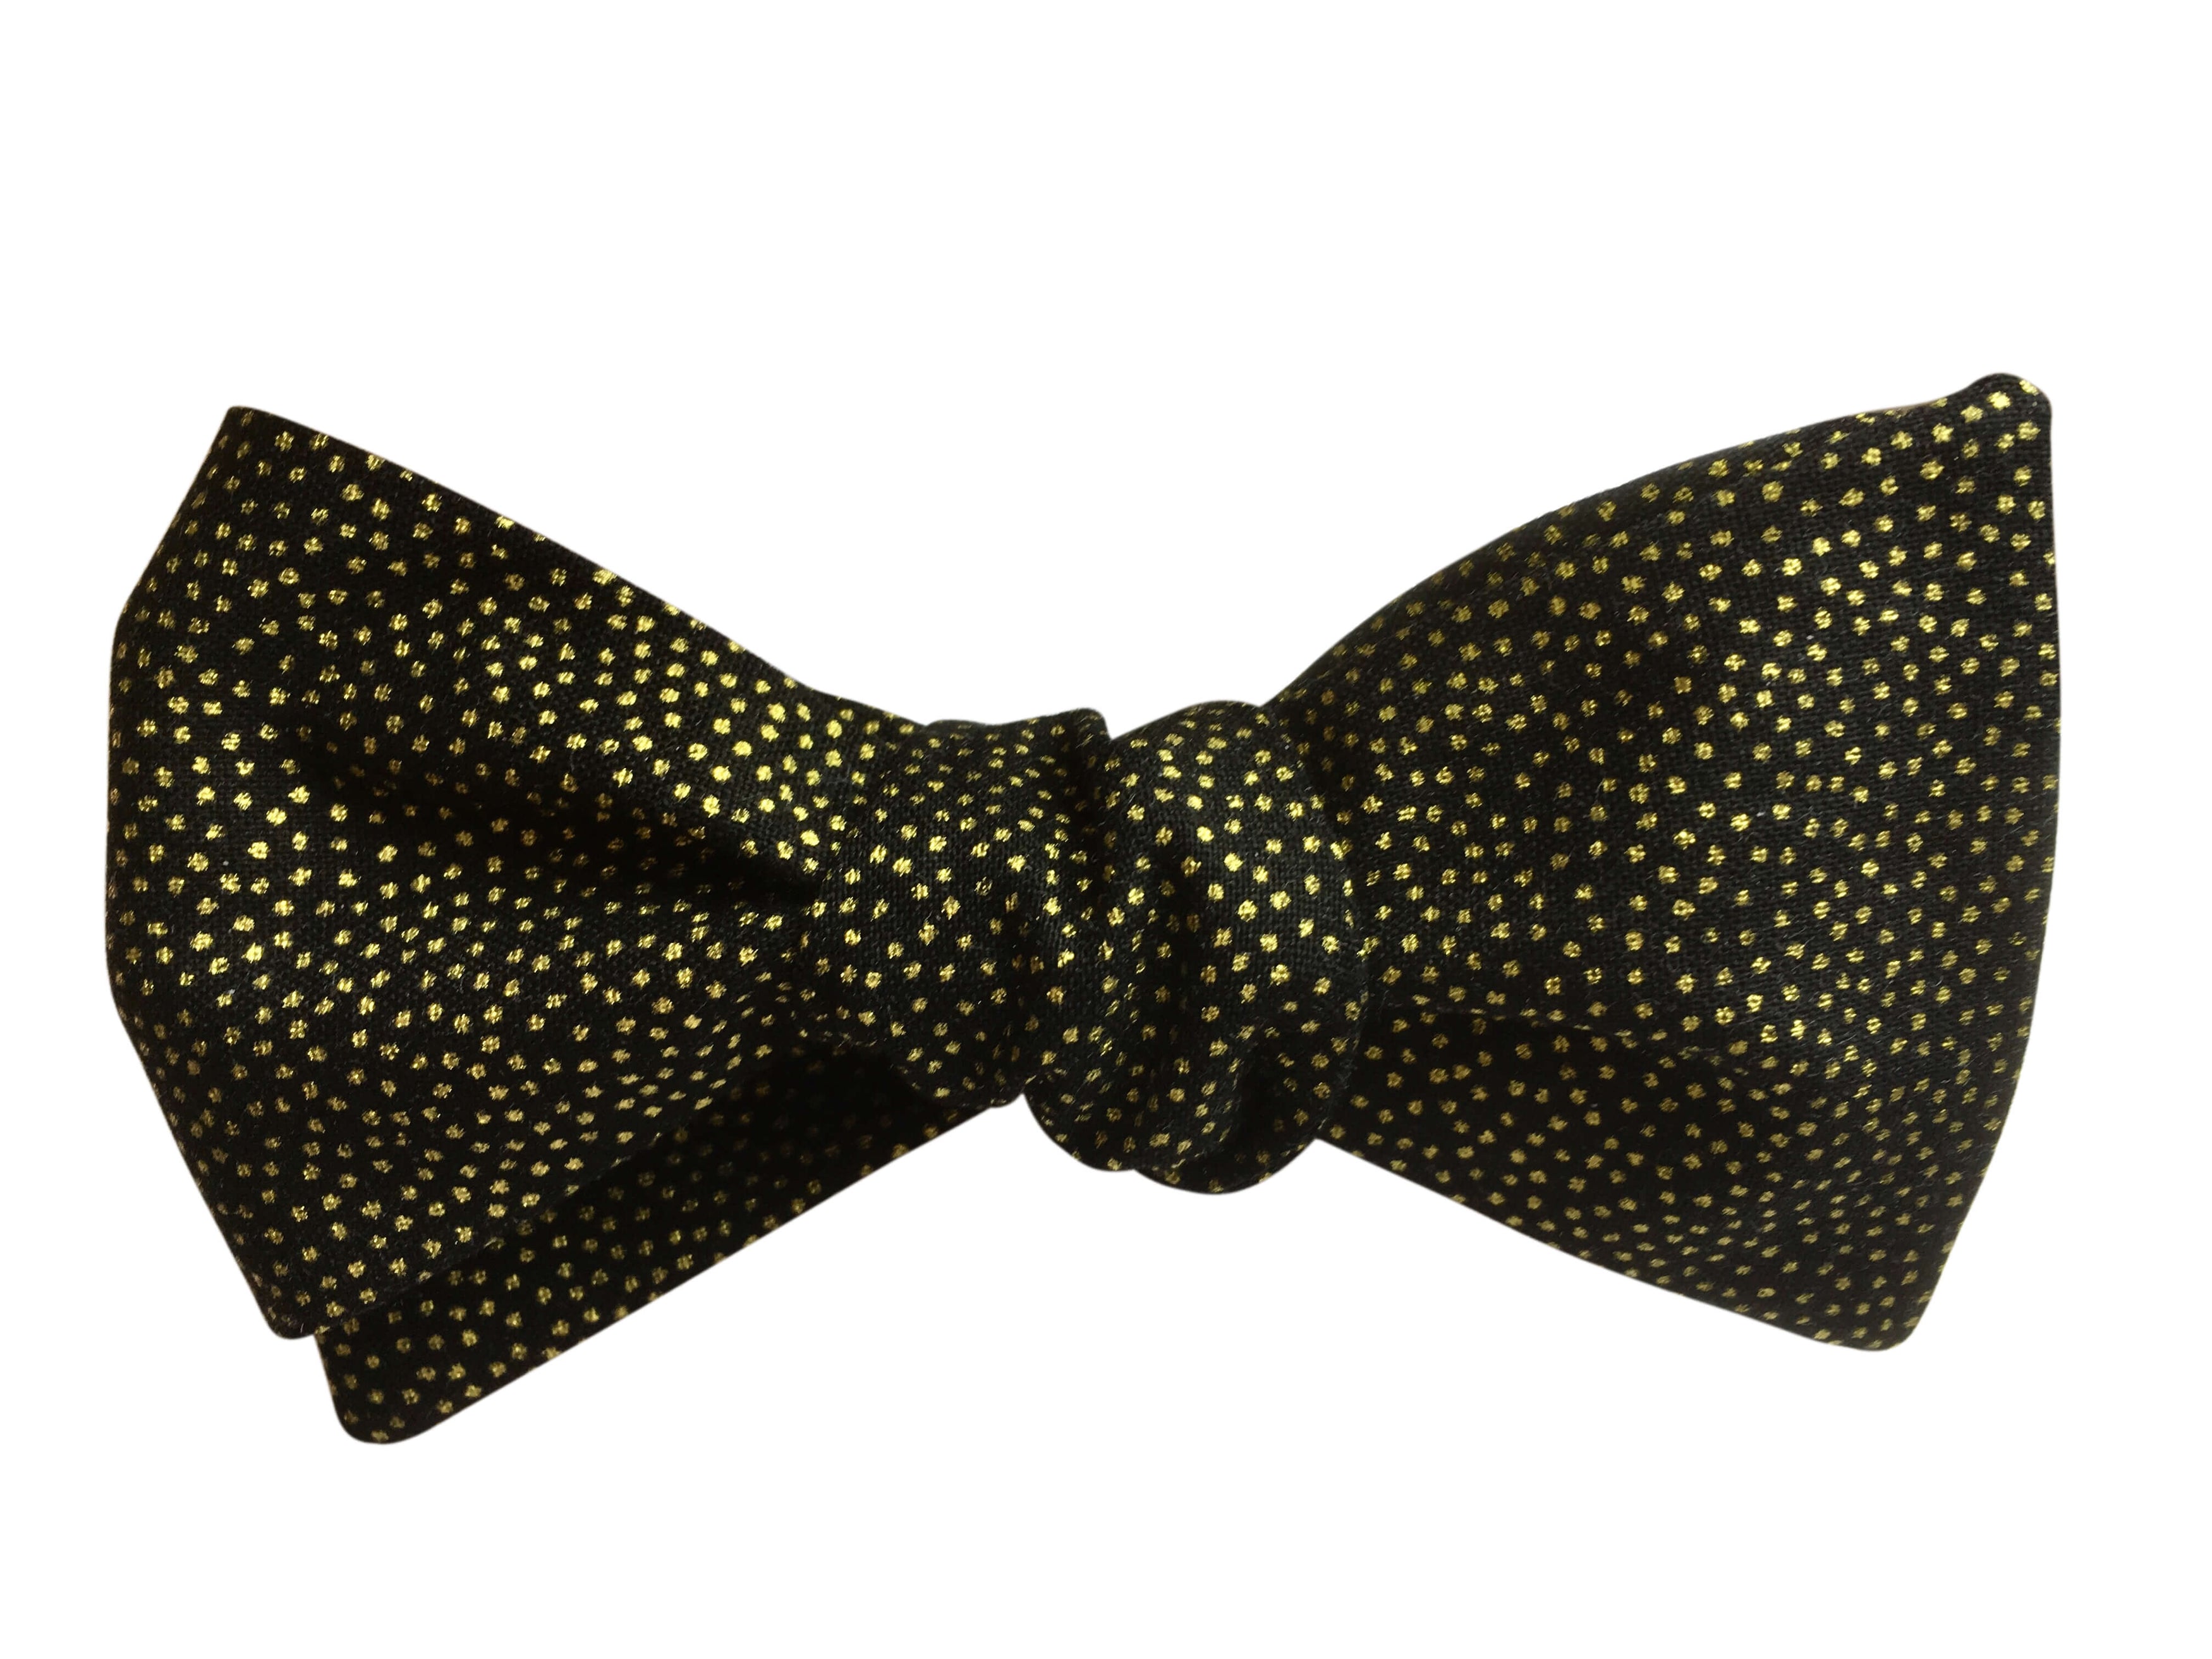 Funky Bow Ties - Unique, Limited Edition Handmade Bow Ties